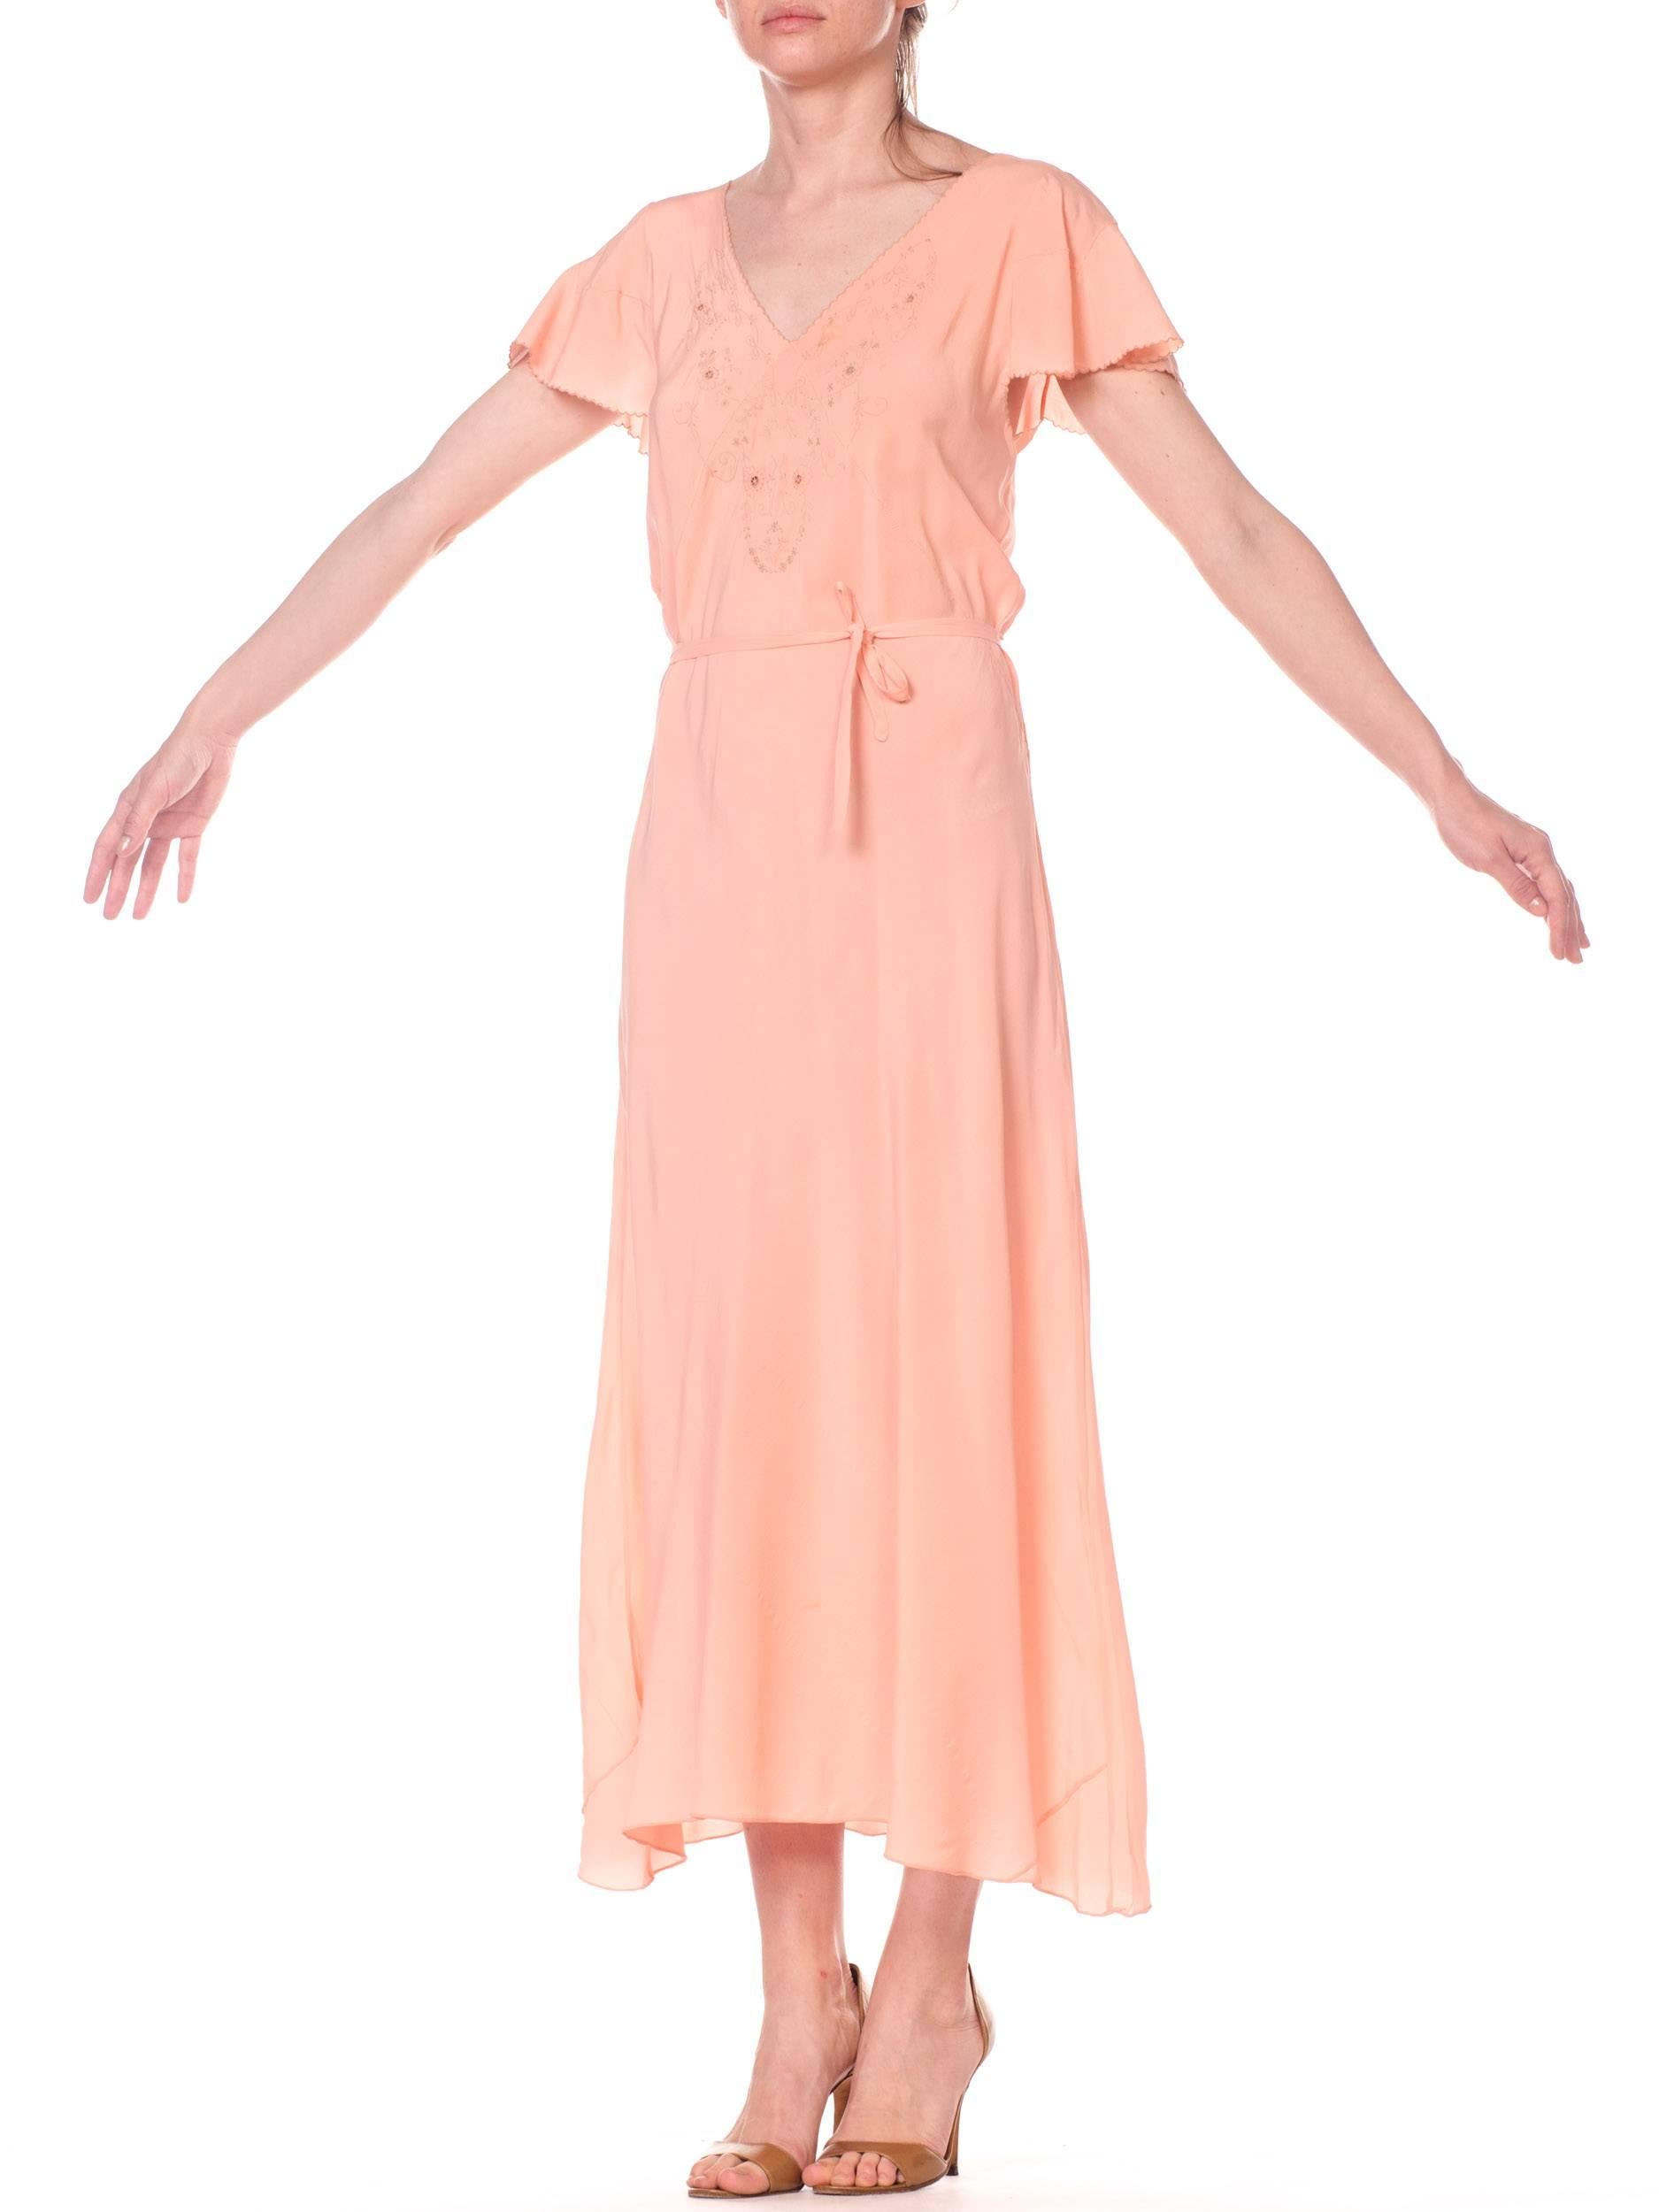 1930S Peach Bias Cut Silk Crepe De Chine Flutter Sleeve Couture Hand Sewn Negligee With Floral Embroidery & Belt